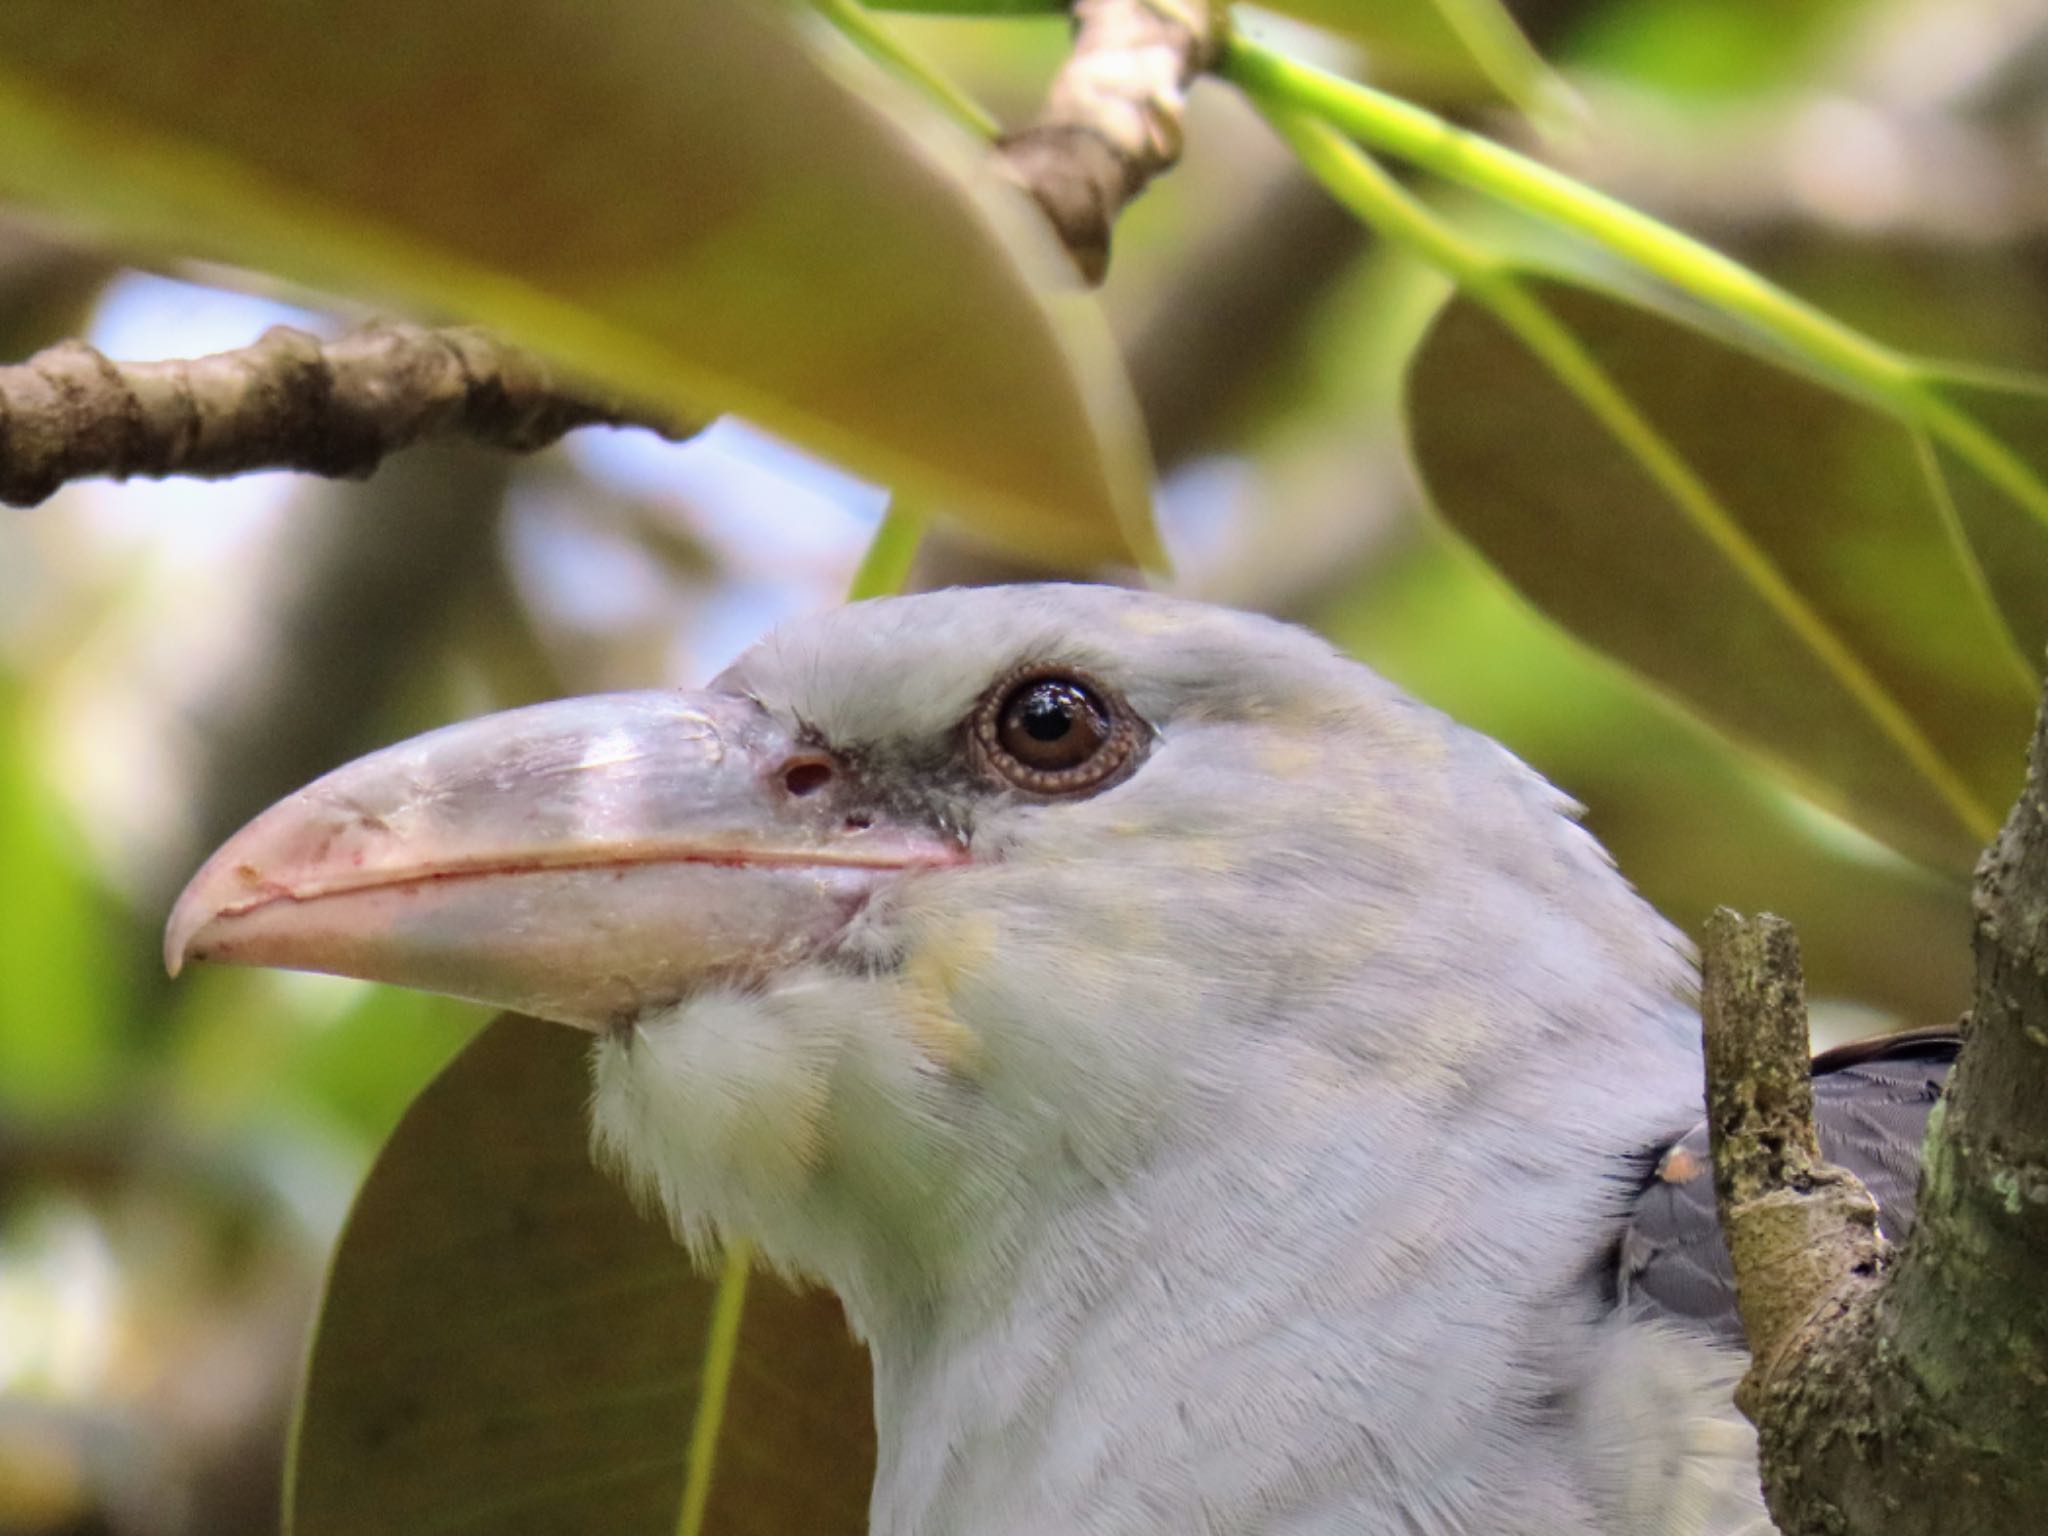 Photo of Channel-billed Cuckoo at Centennial Park (Sydney) by Maki